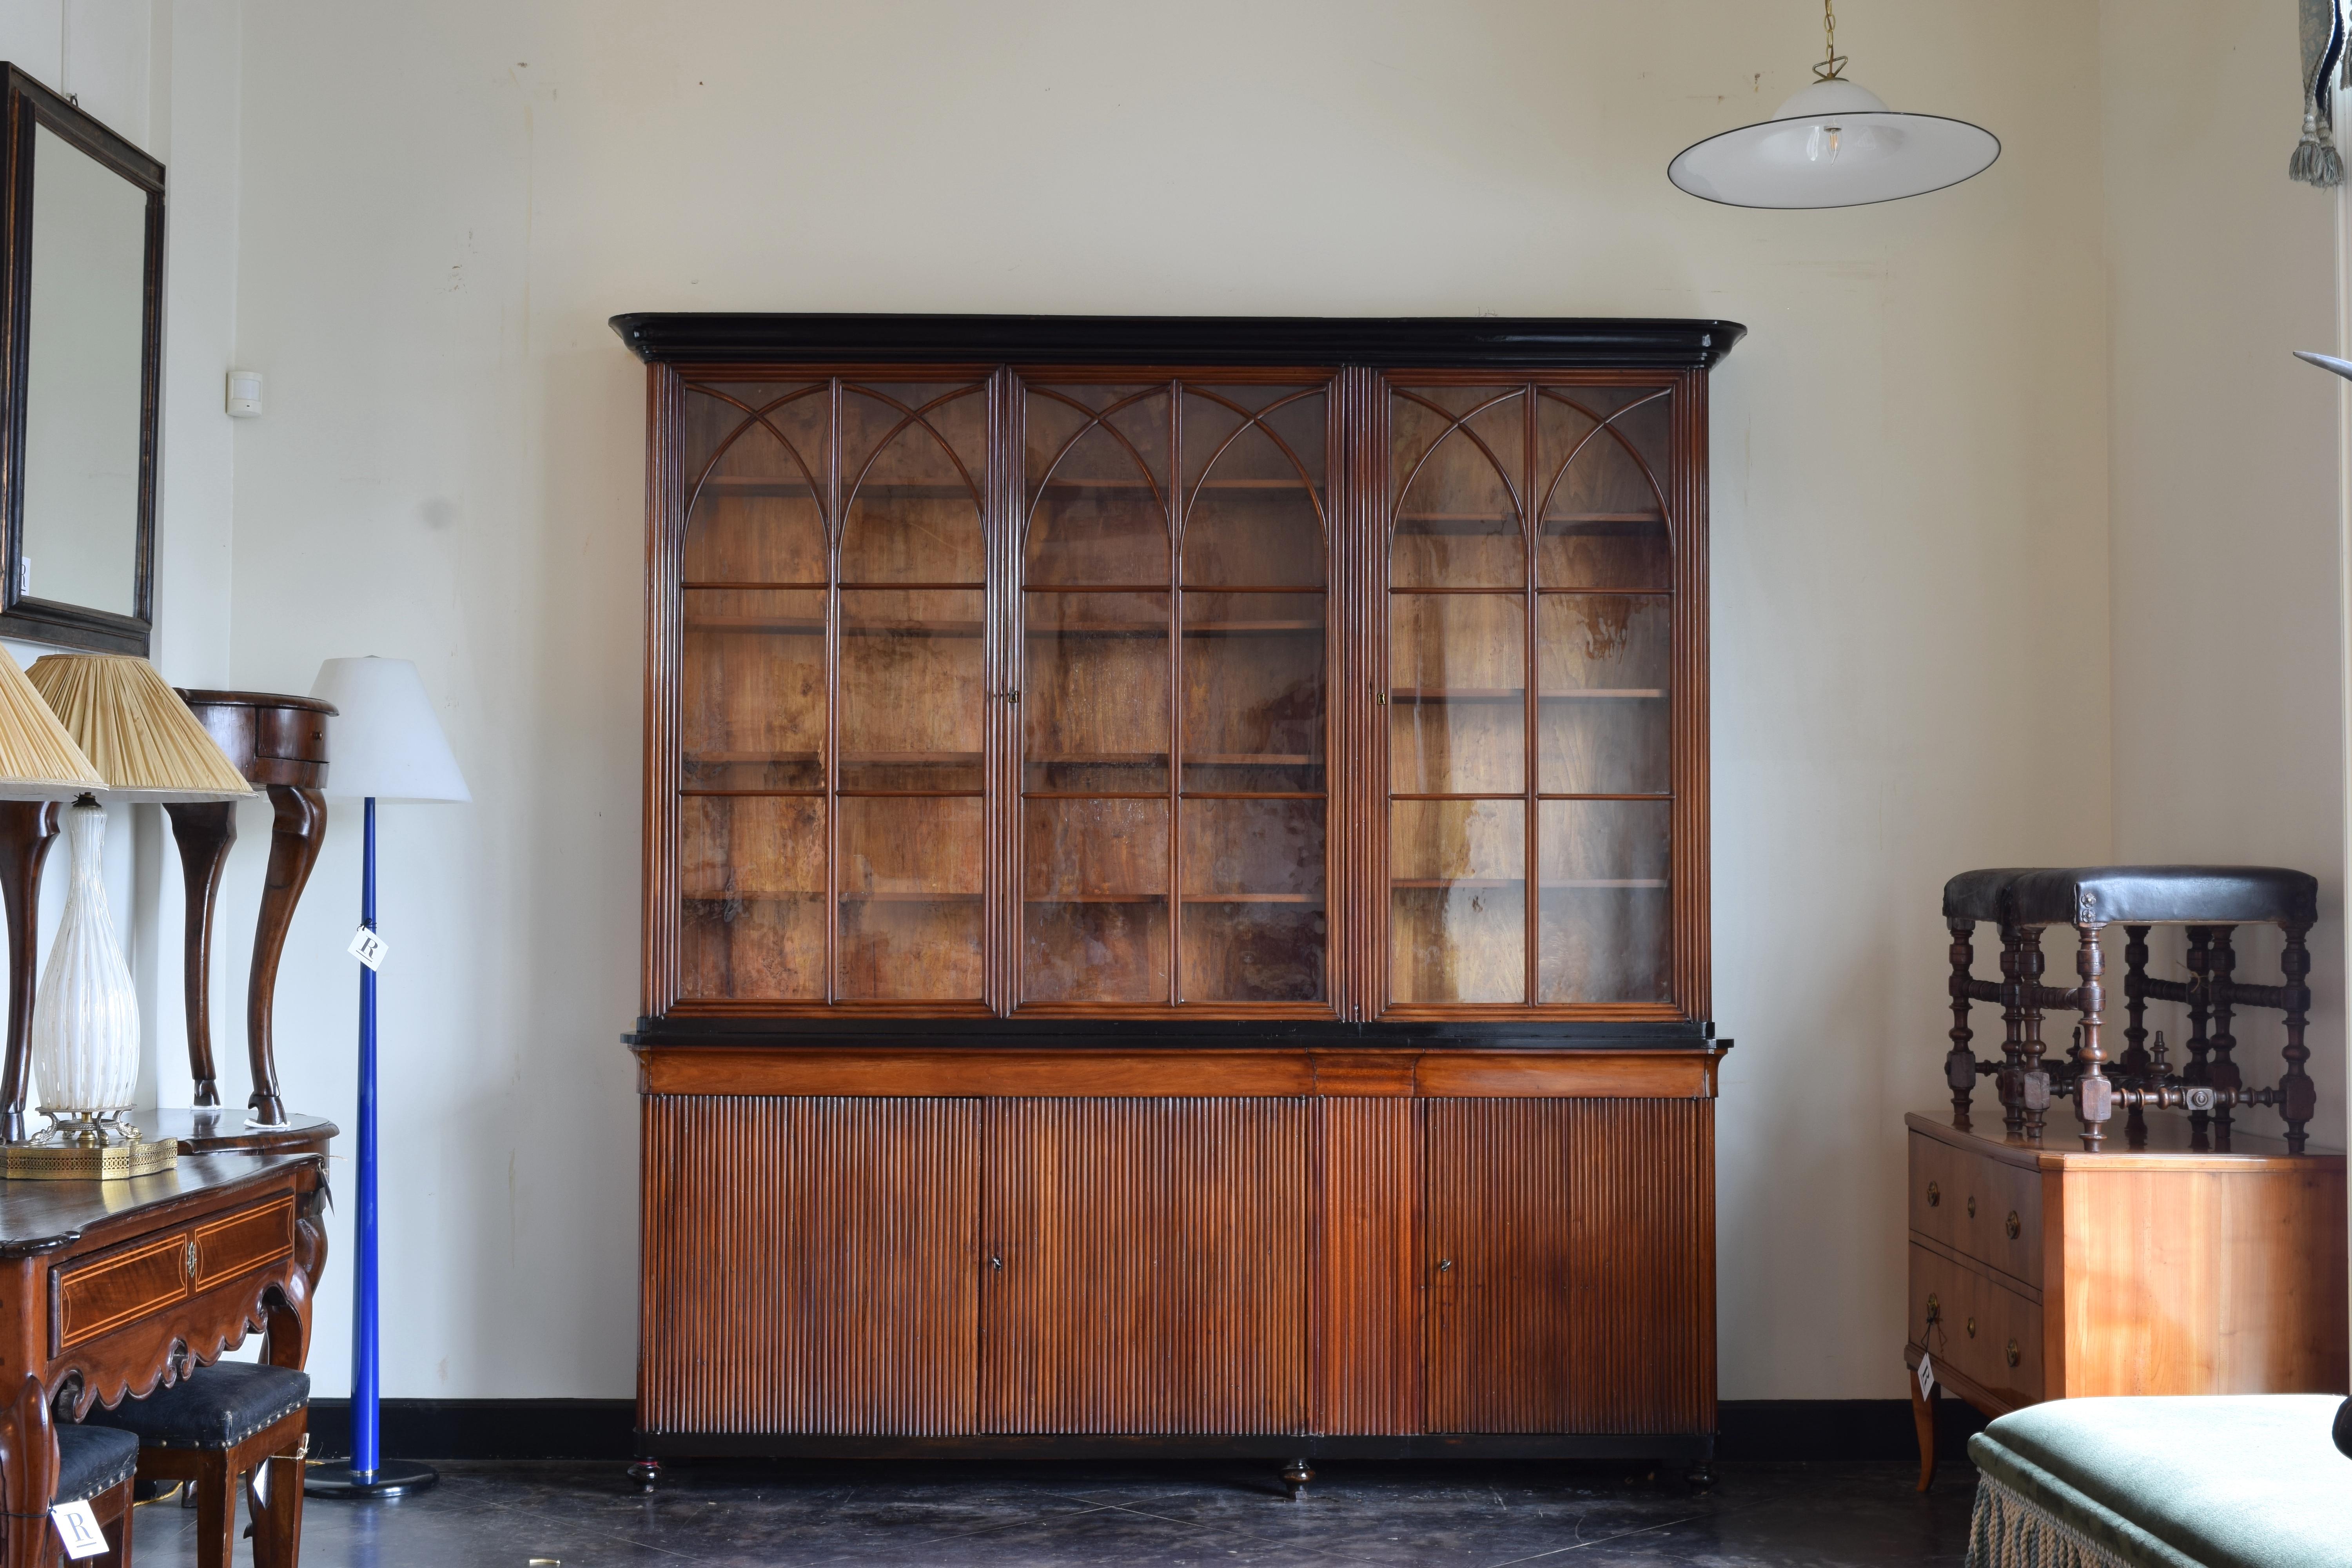 Beautifully crafted bookcase with three ebonized sections:  the crown, middle top, and lower sections and feet, the upper doors with original glass  and applied woodwork of arches, the lower sections with fluted wood, a secret section between and